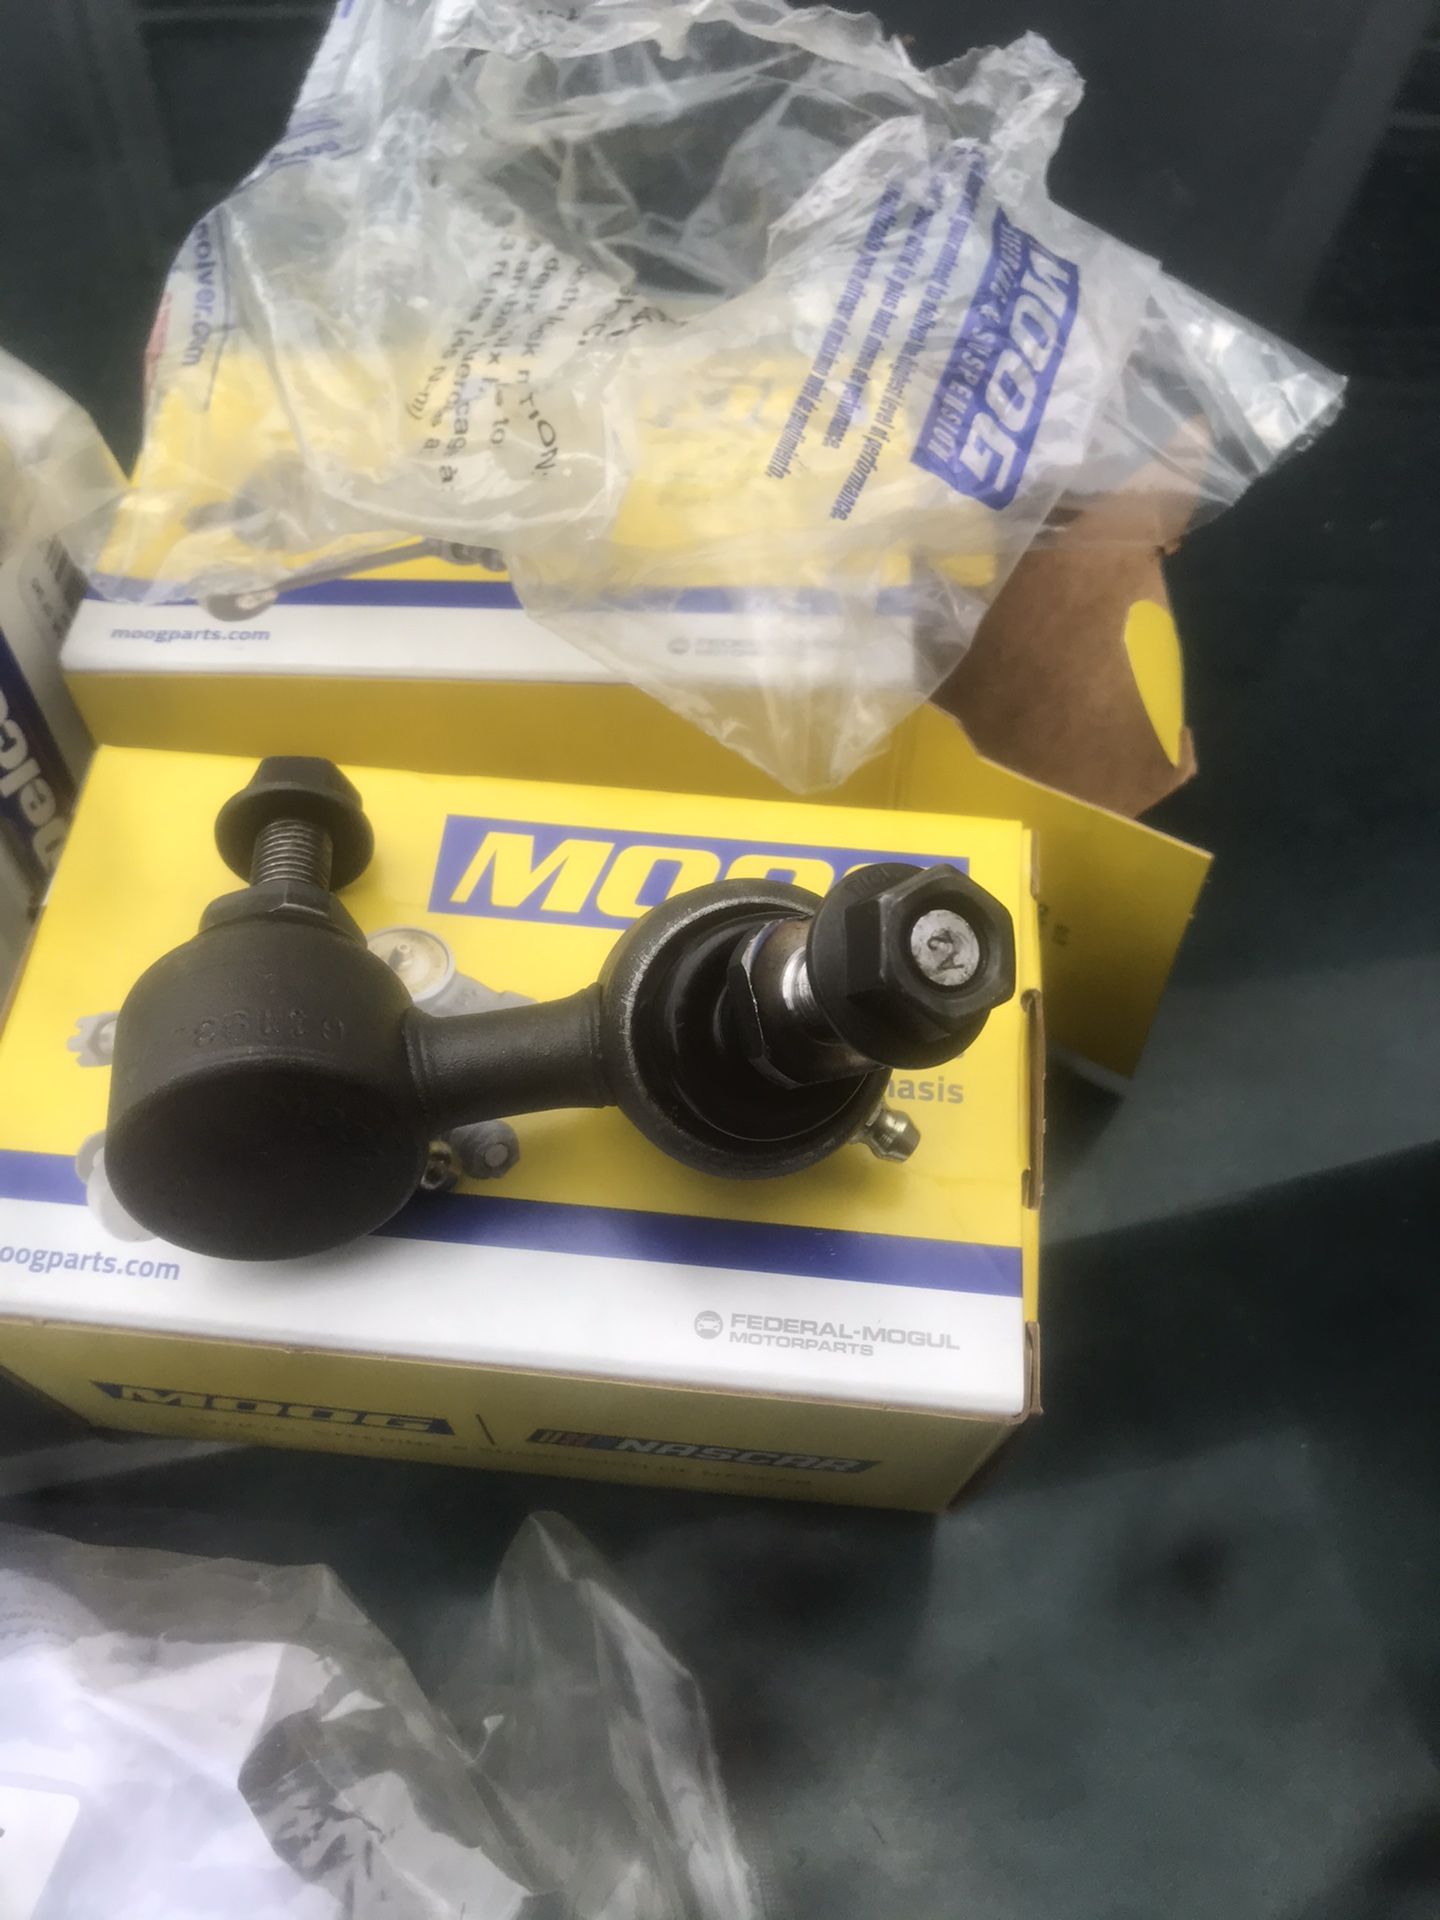 Acura RSX PARTS brand new cheap